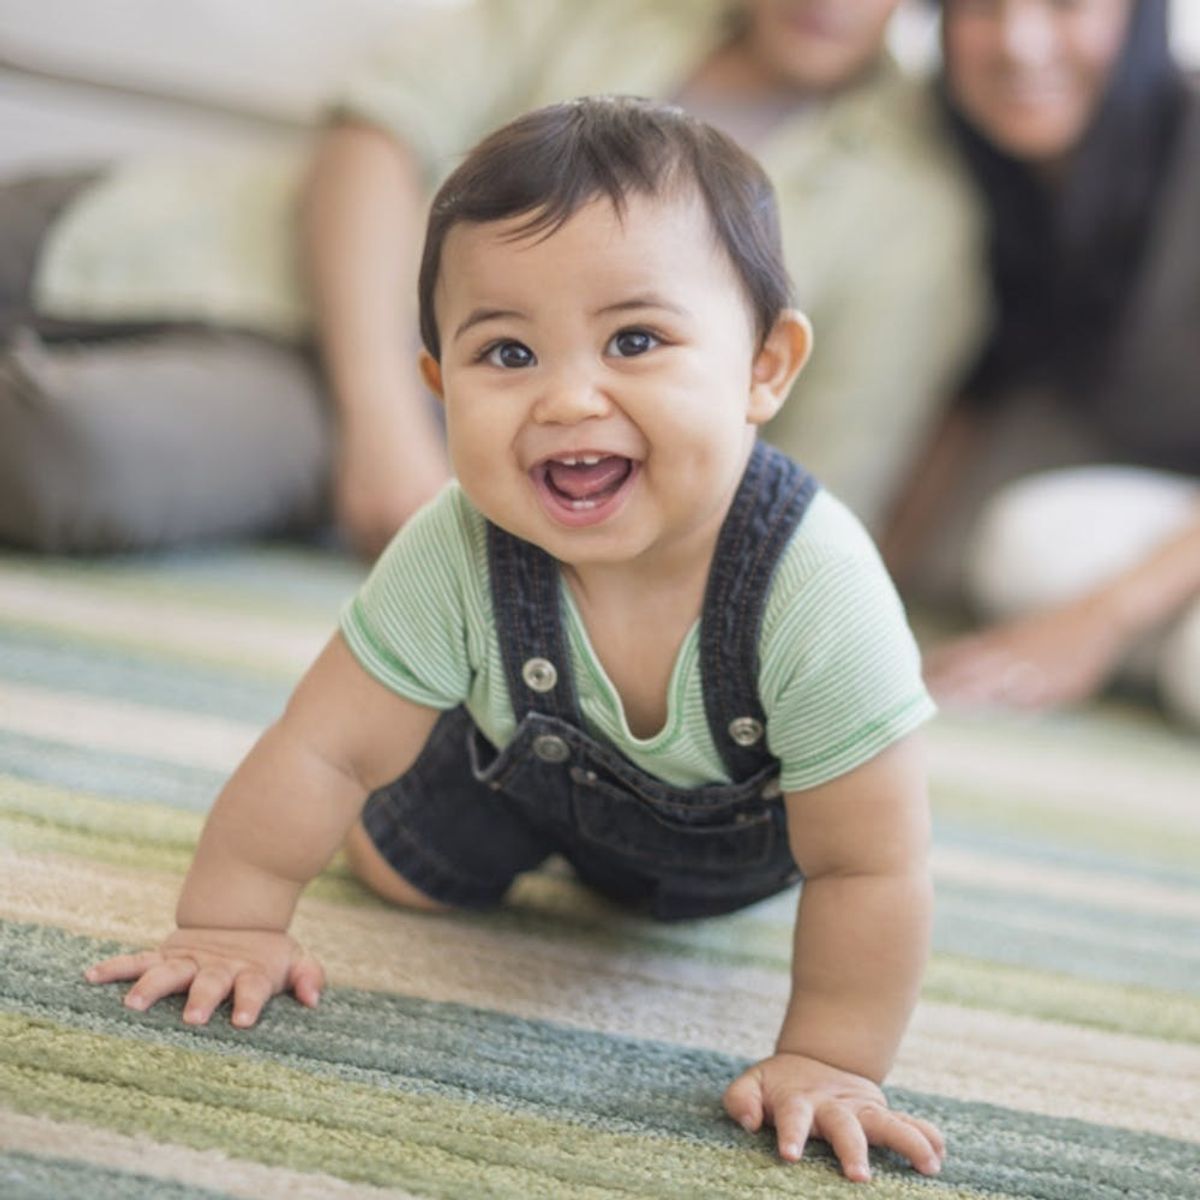 5 Reasons to Consider Gender-Neutral Baby Clothes